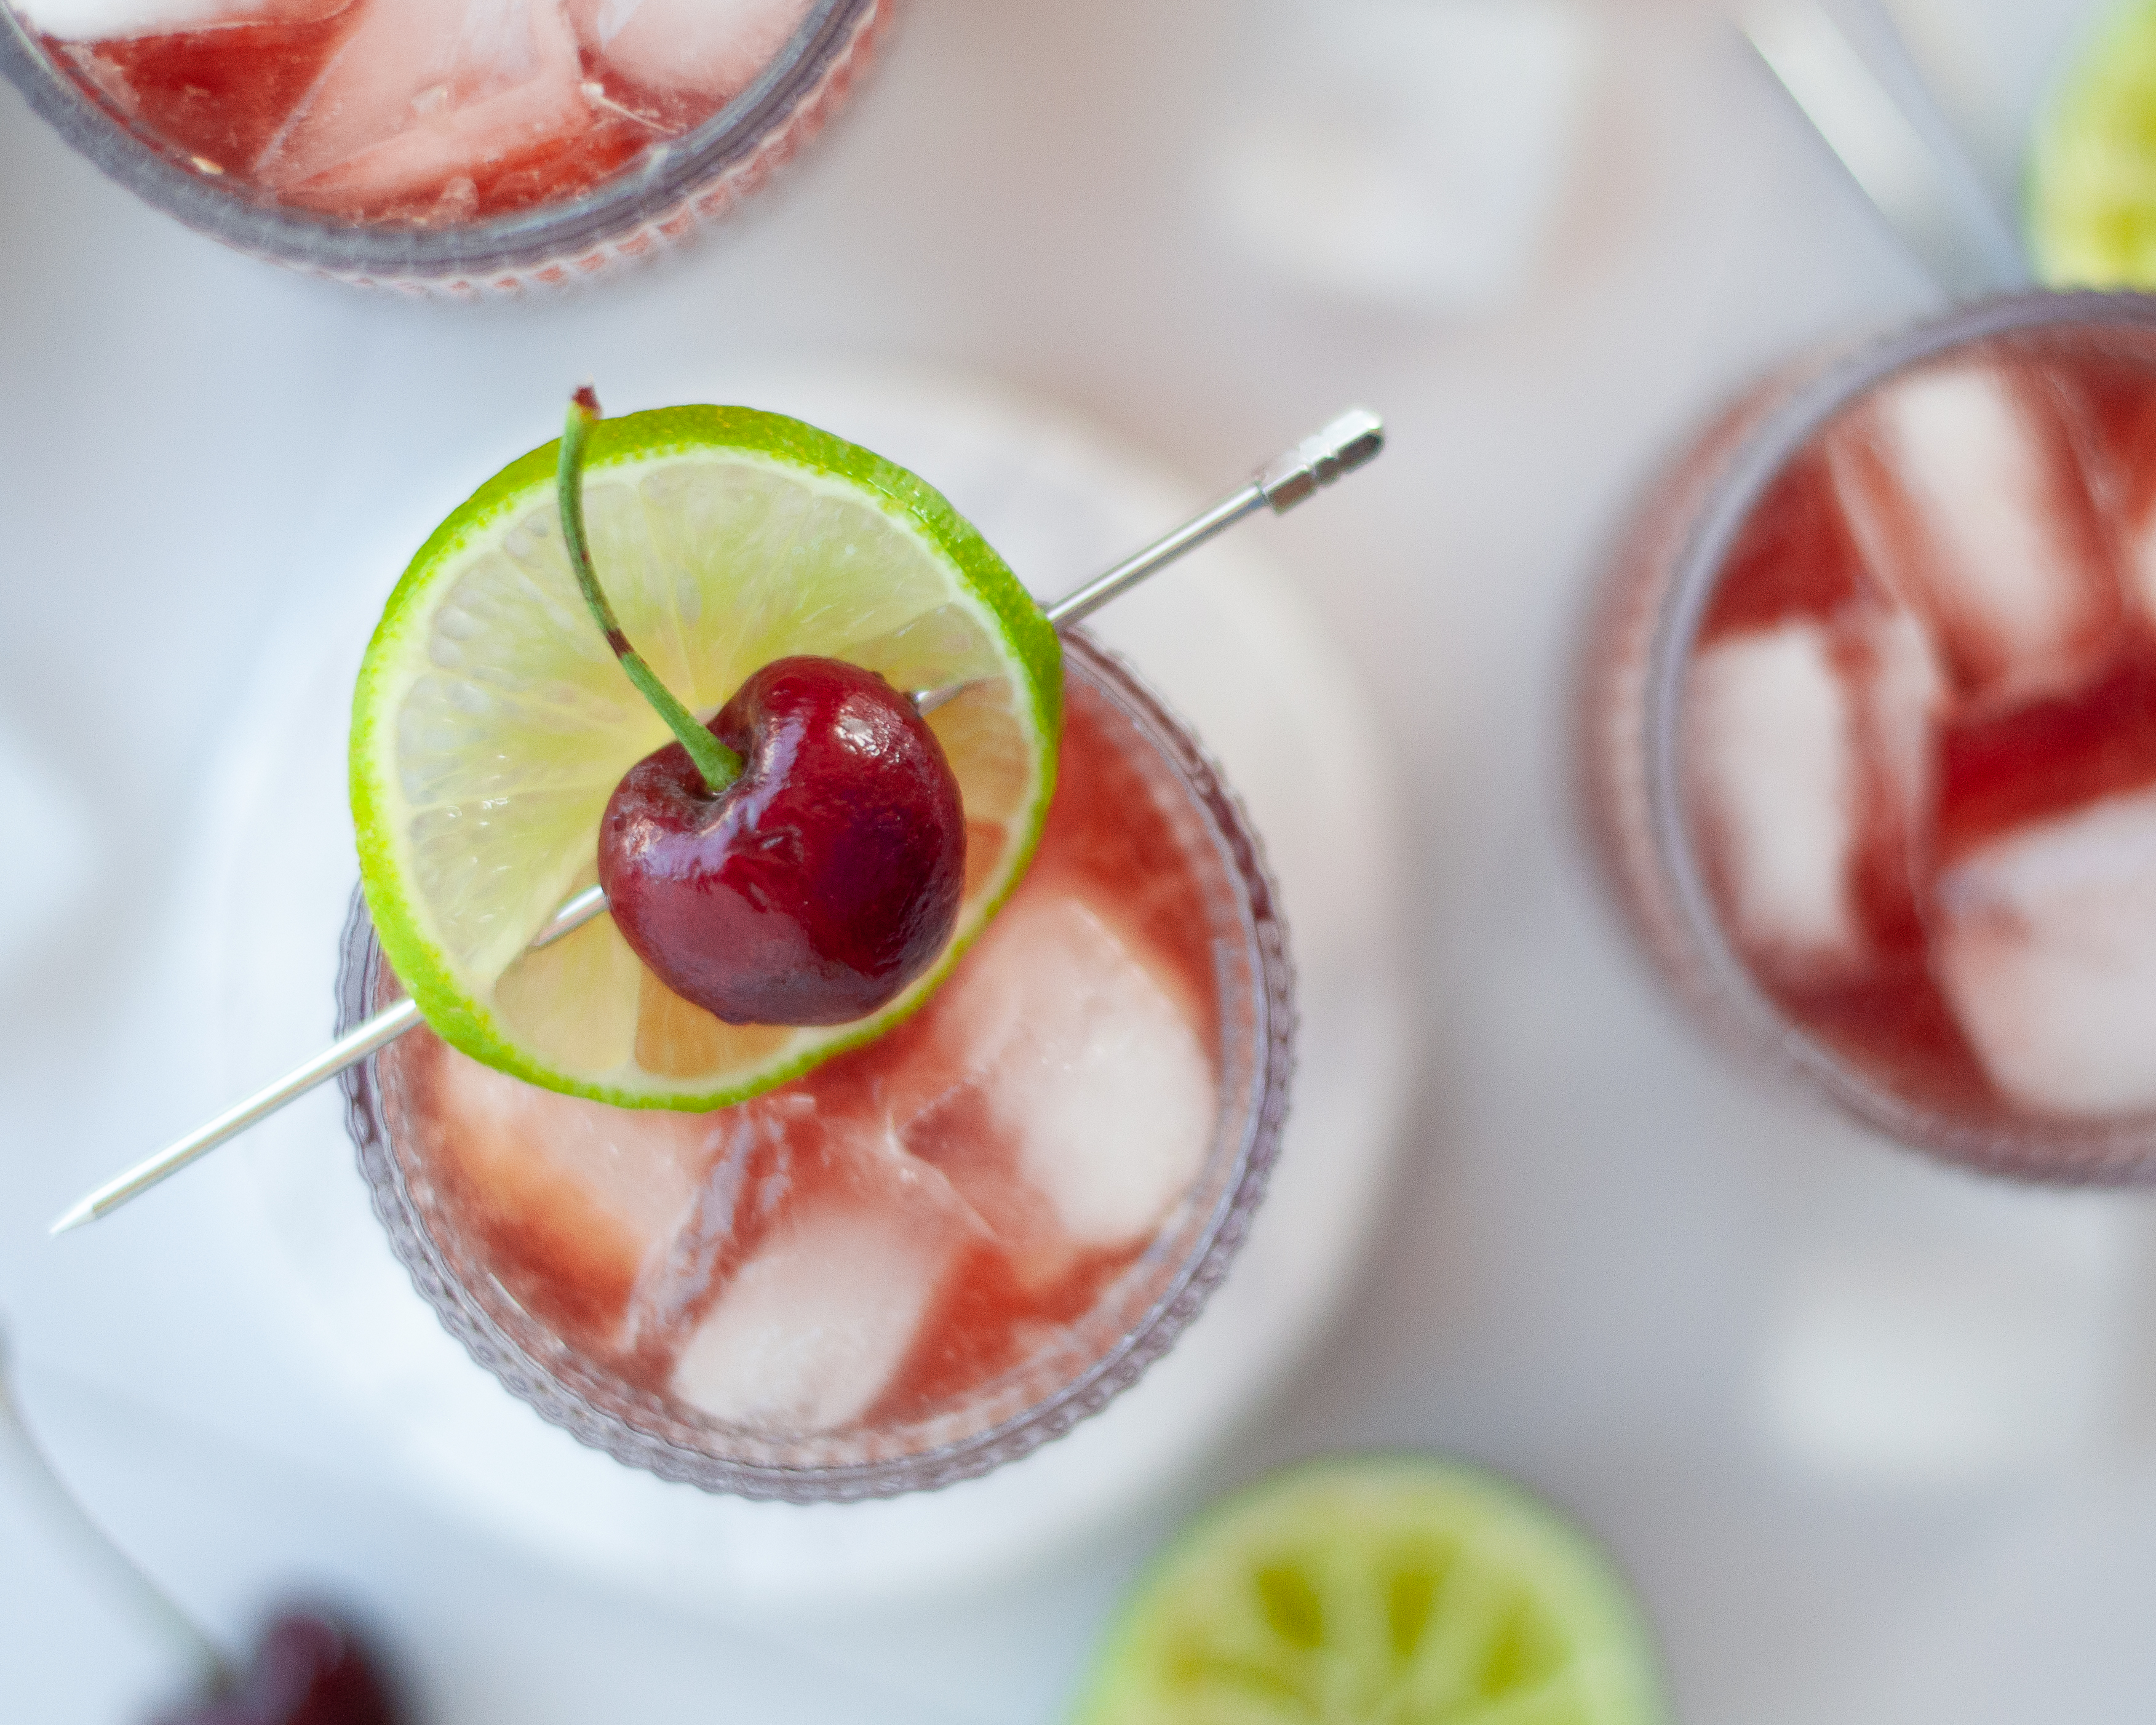 Top down view of a glass of this cherry mocktail. The garnish of a fresh cherry and lime slice really jump out at you in this image. Surrounding the main glass is ice, pieces of lime, fresh cherries, and additional glasses filled with this easy non alcoholic drink recipe.